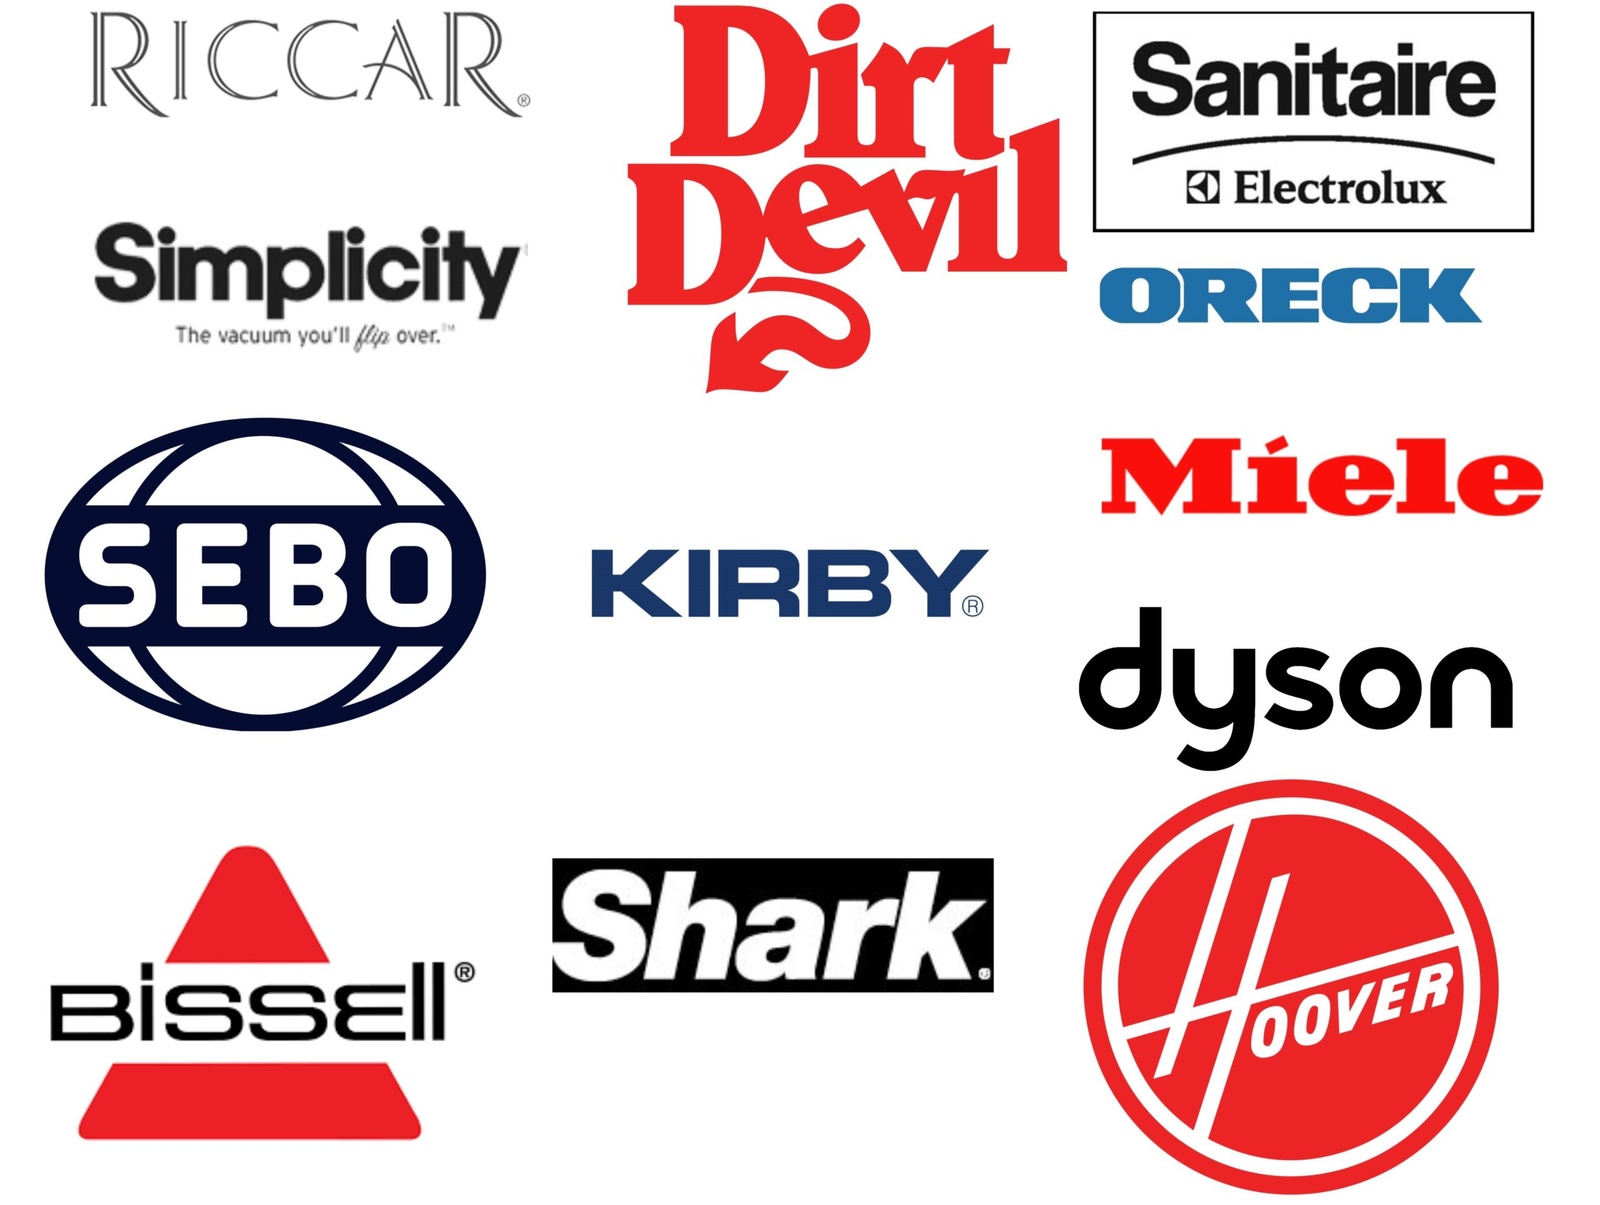 the-vac-shop-calgary-Service-dyson-miele-riccar-hoover-shark-bissell-kirby-sebo-electrolux